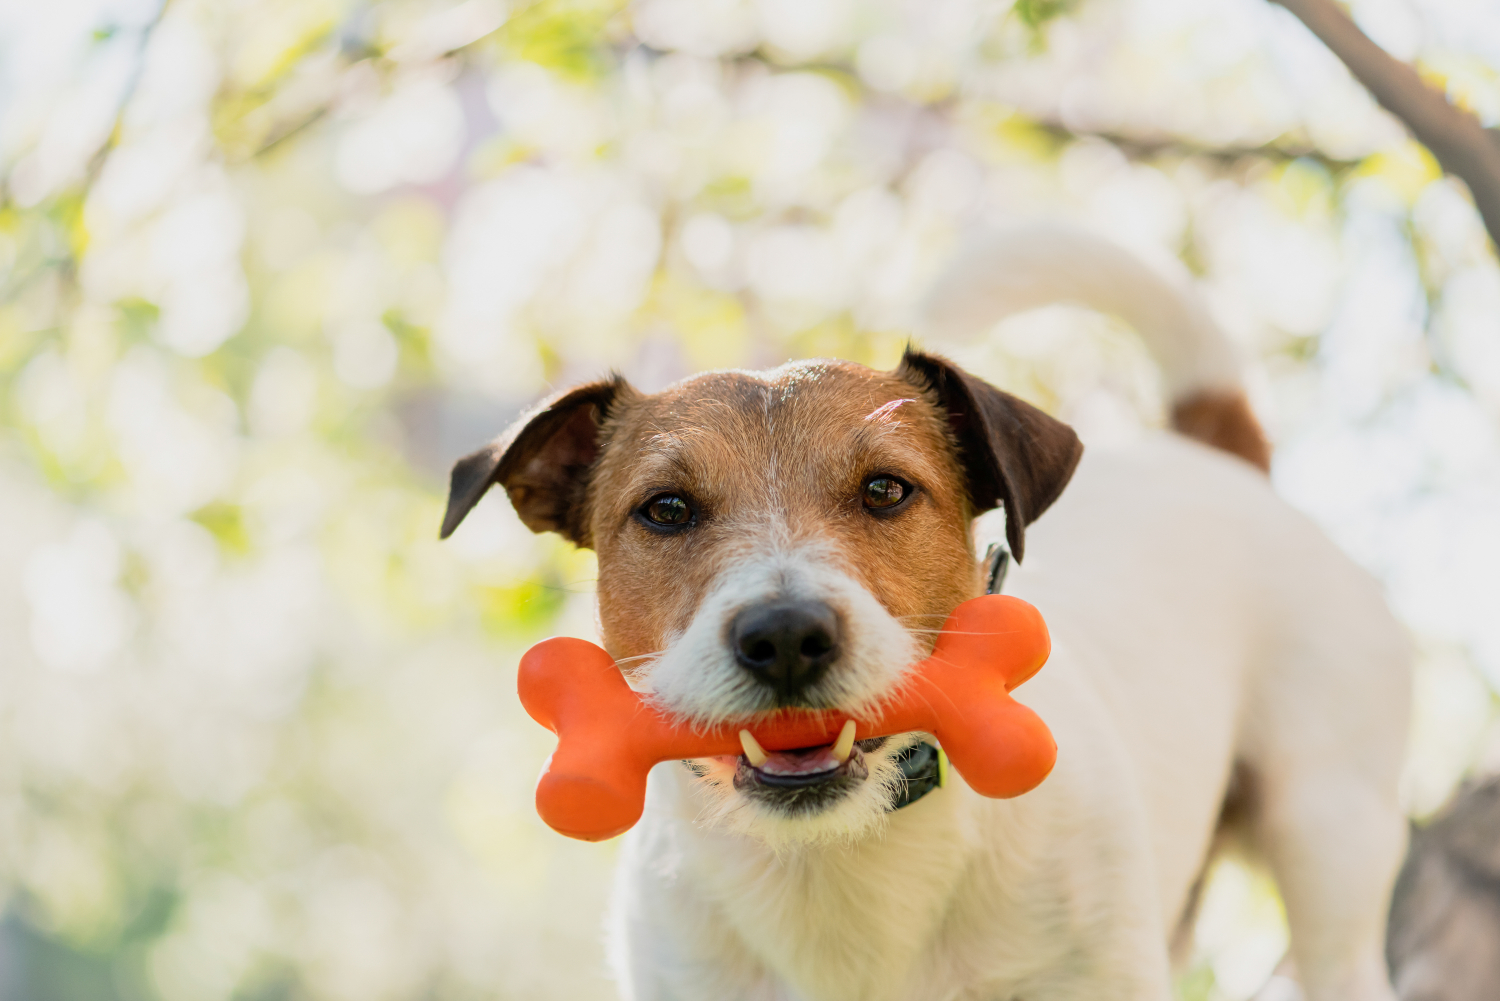 dog with orange chew toy in their mouth